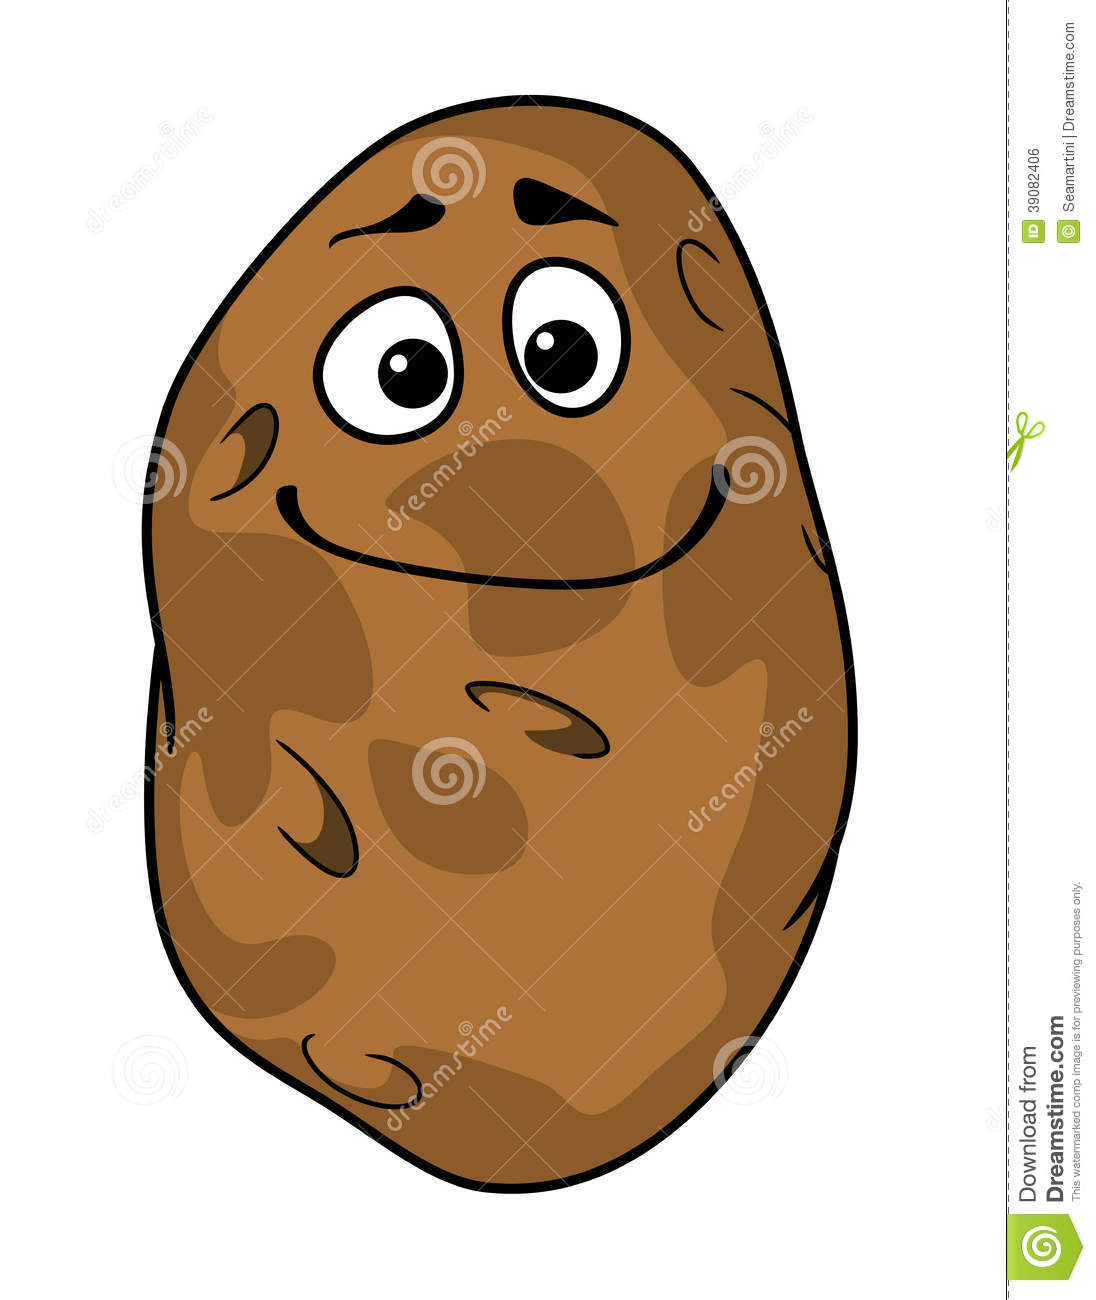 Goofy Cartoon Farm Fresh Potato With A Silly Grin And Squinting Eyes    